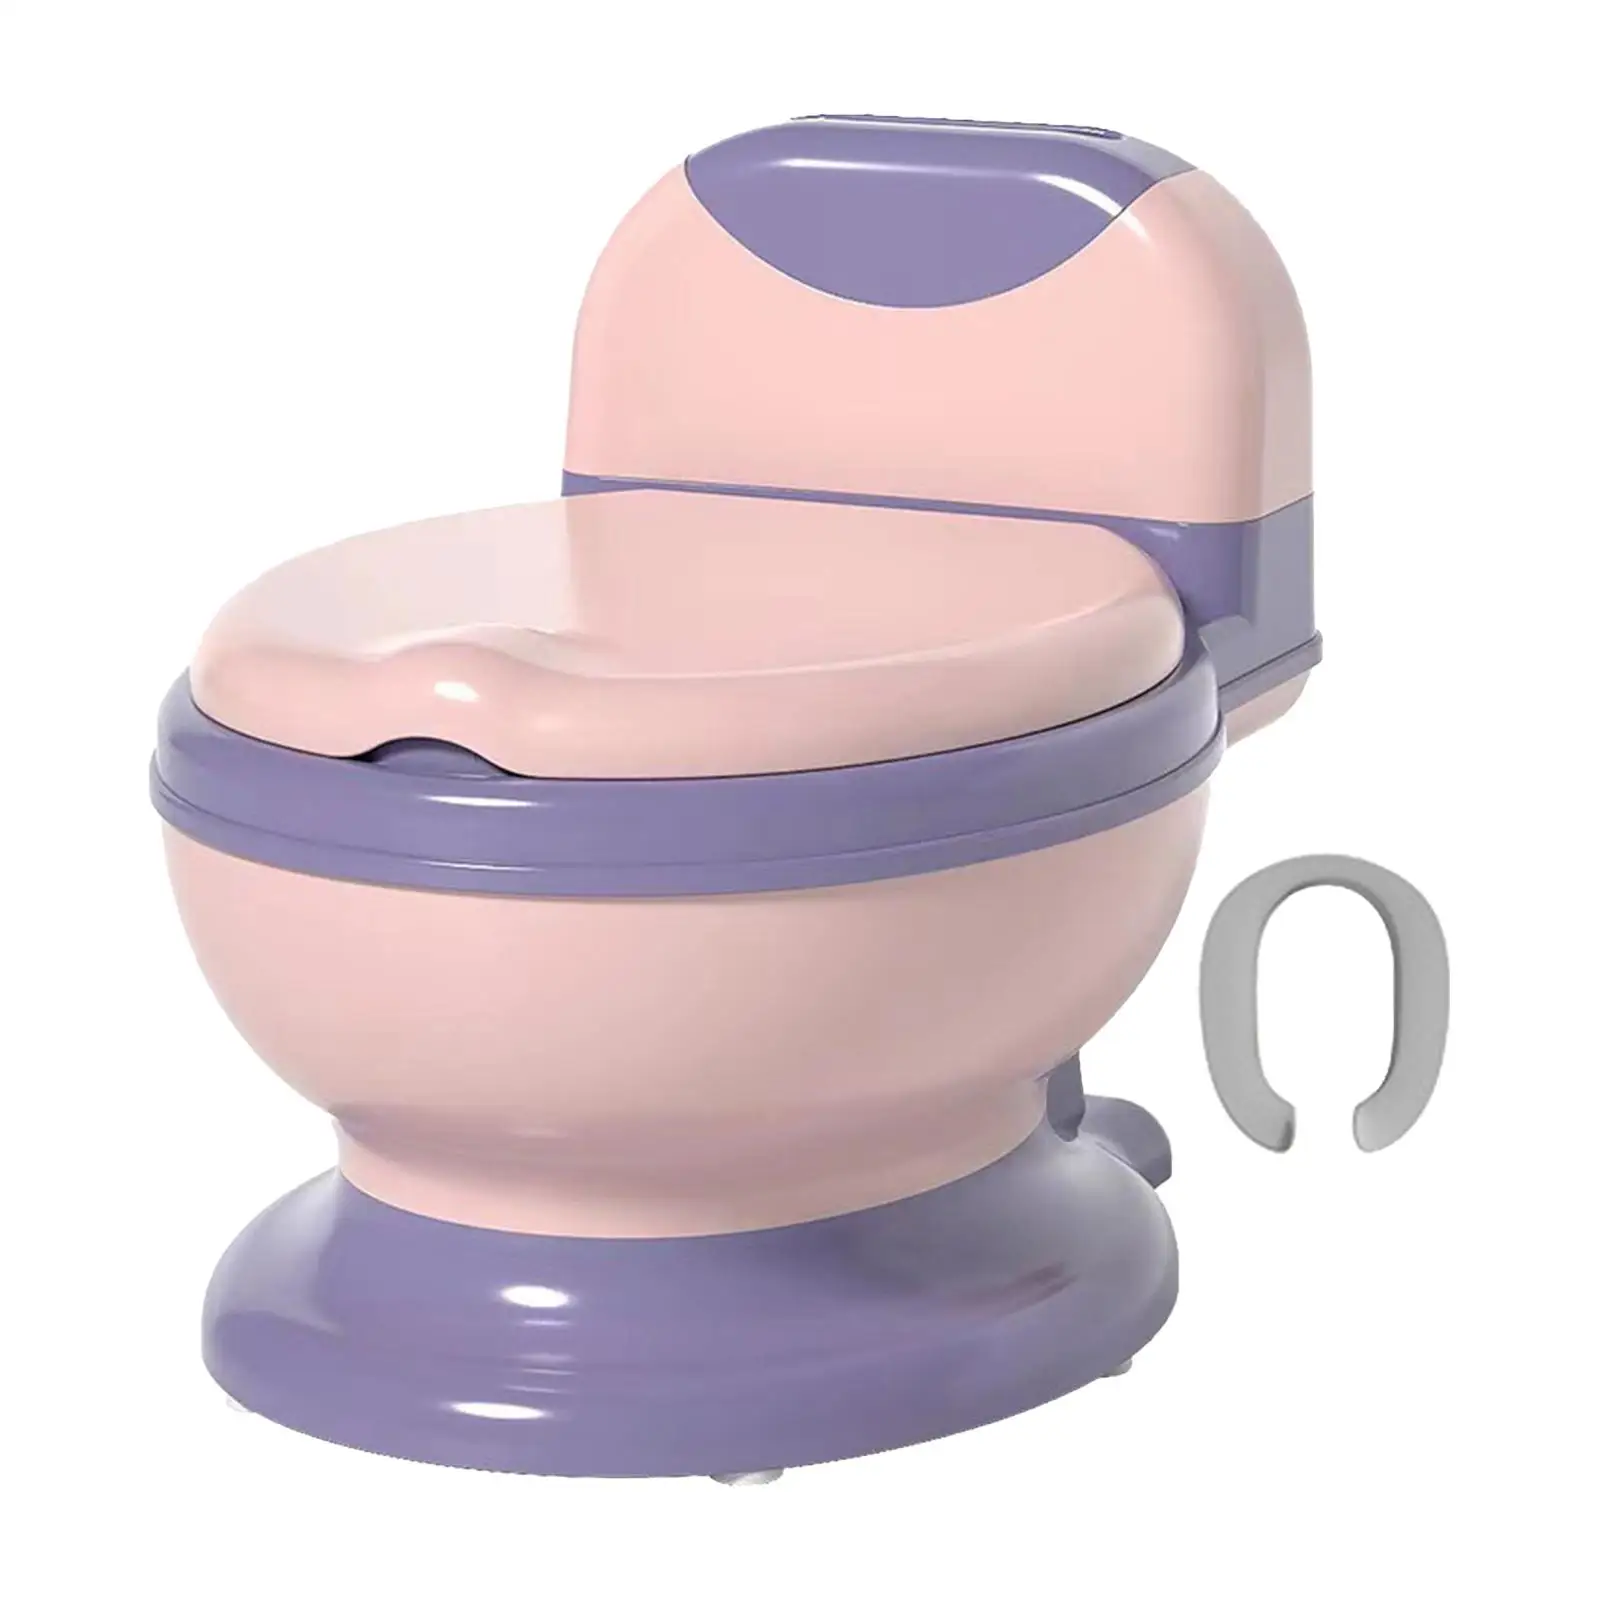 Potty Train Toilet Toilet Training Seat Potty Seat Removable Potty Pot Toddlers Potty Chair for Girls Baby Toddlers Boys Kids